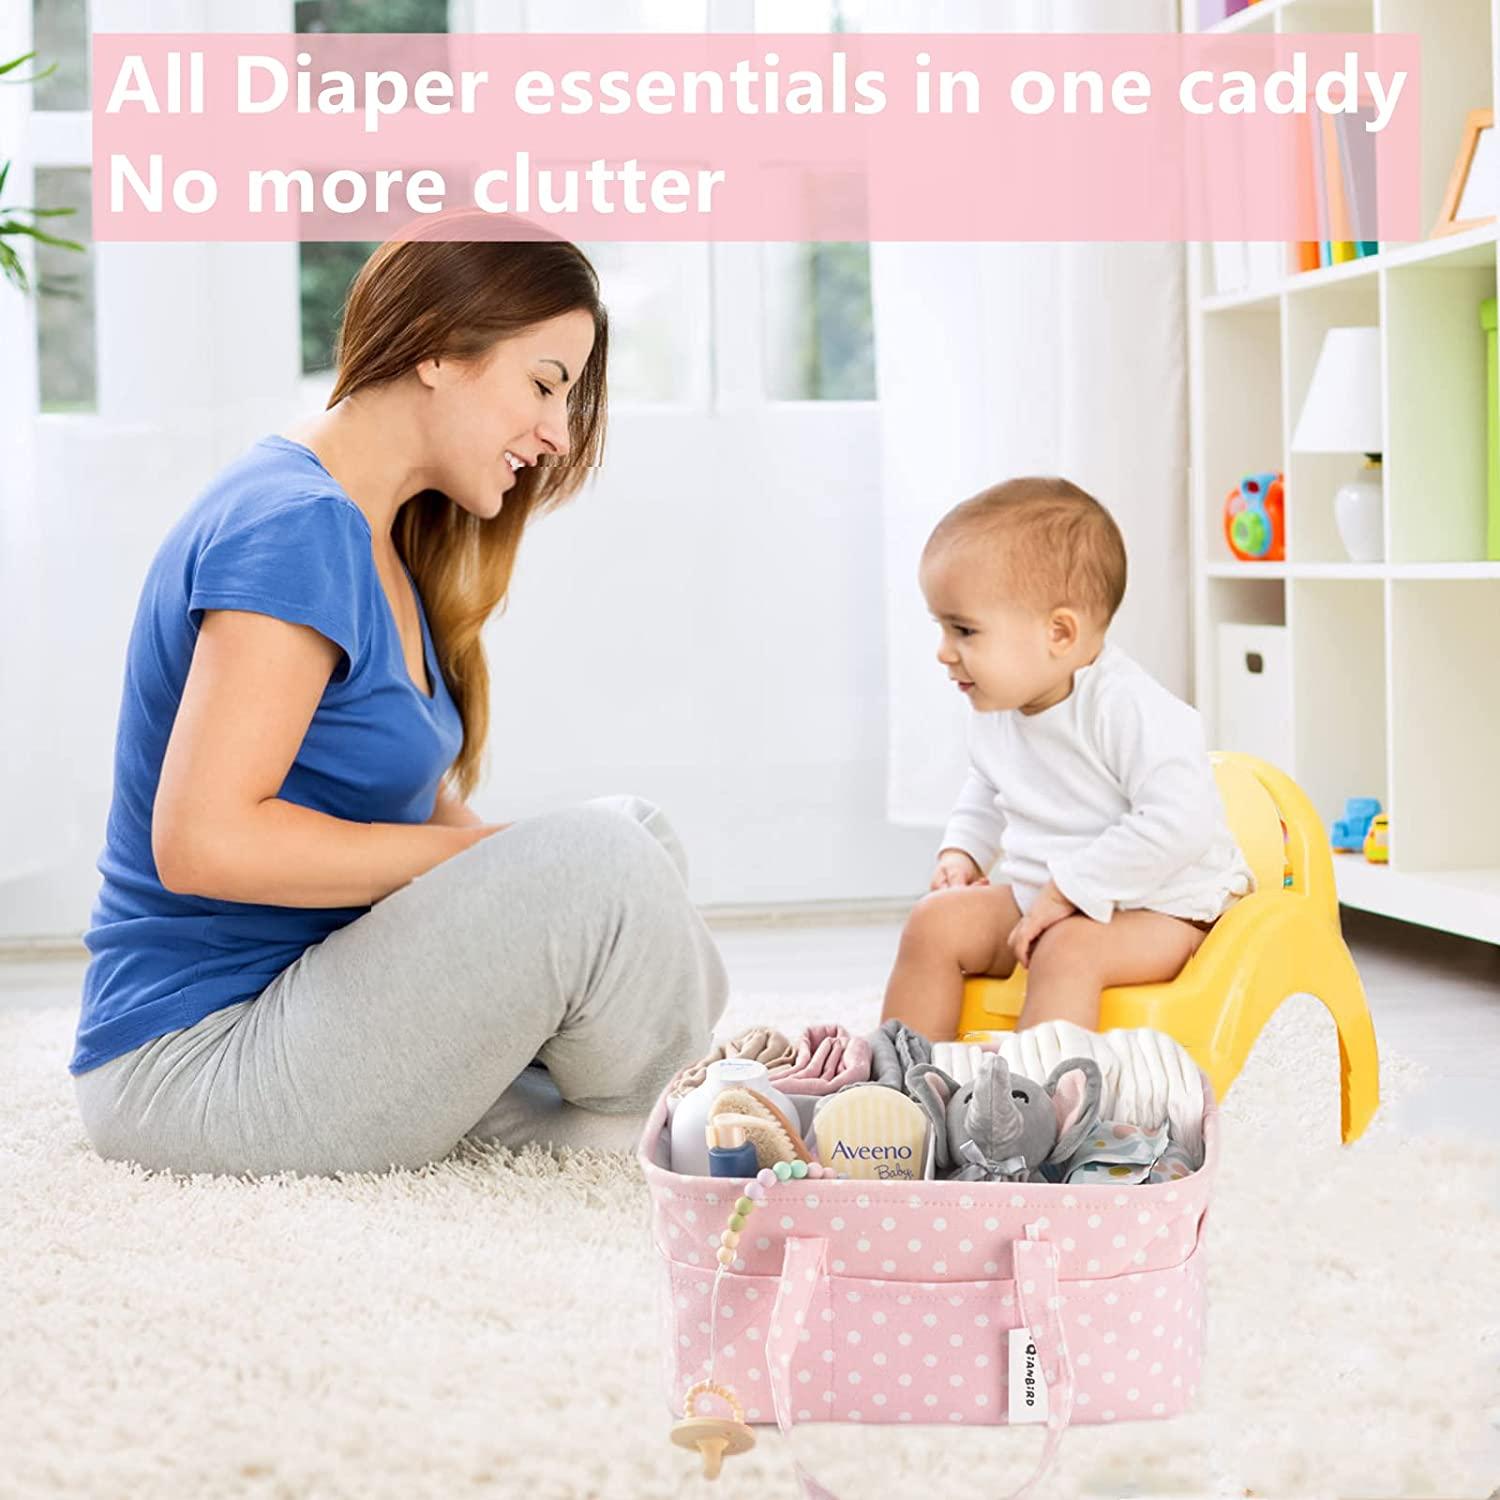 Baby Diaper Caddy Organizer - Large Baby Organizers and Storage for Nursery  - Portable Diaper Basket for Changing Station - Fits Changing Table - Baby